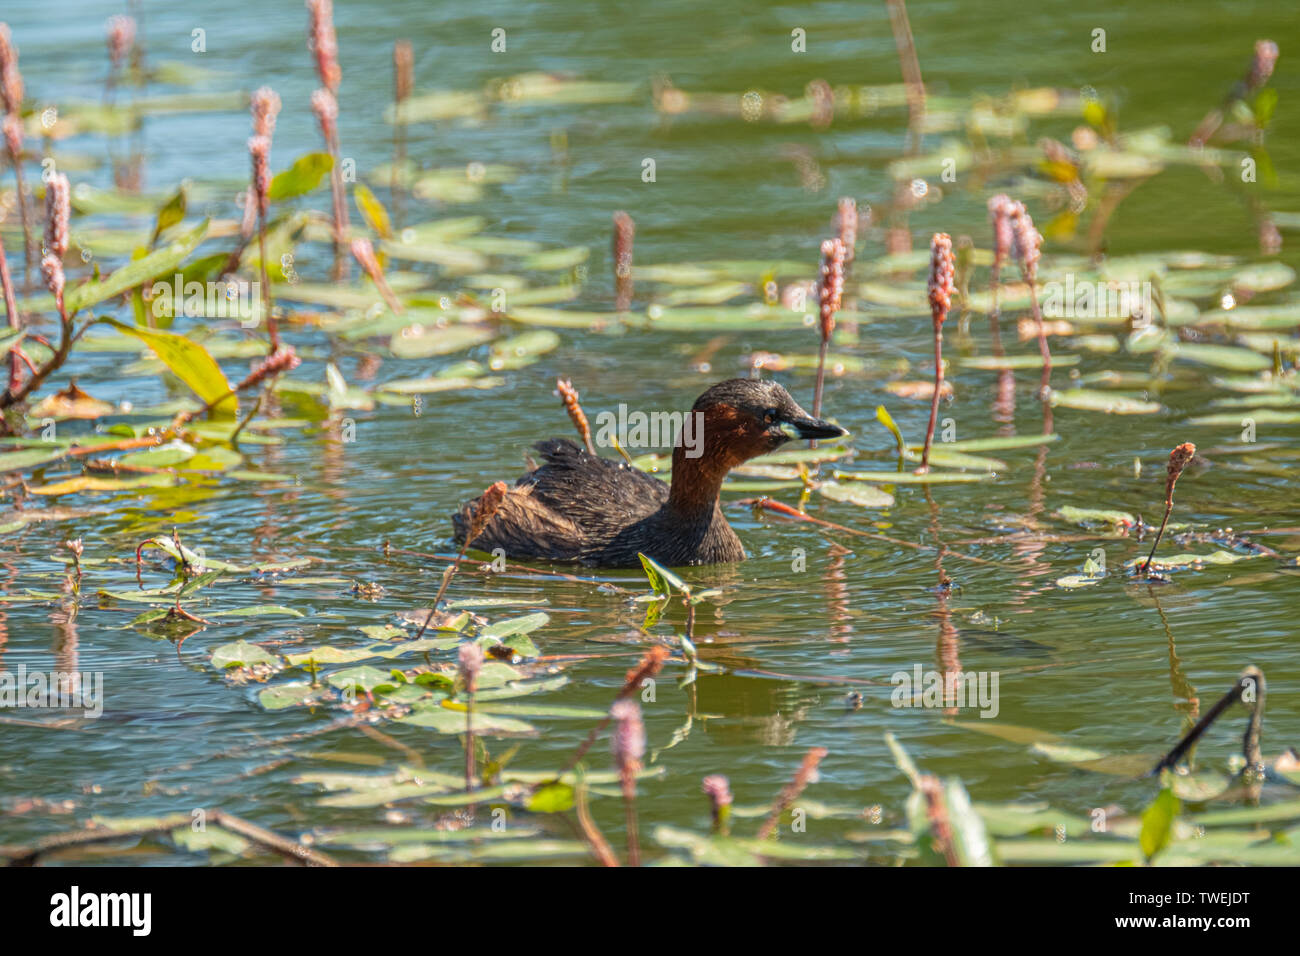 Common grebe, Tachybaptus ruficollis, on the calm waters of the river and next to the aquatic plants typical of the area Stock Photo